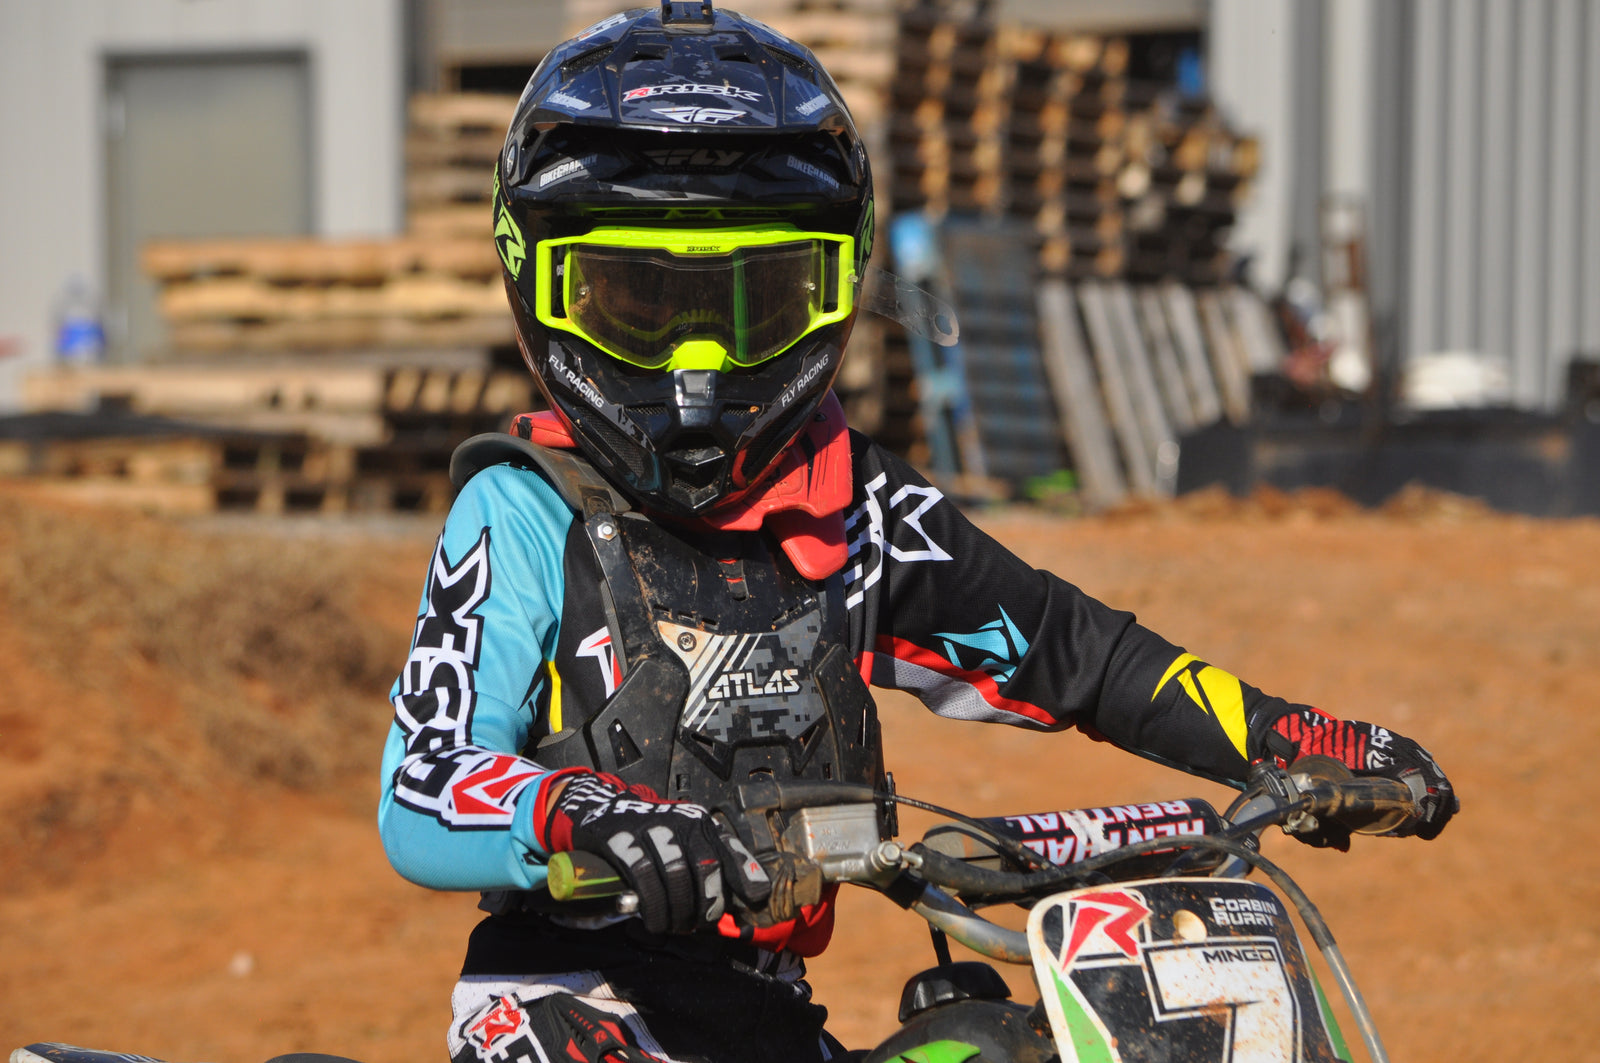 Pit Bikes - what are people riding now? - Moto-Related - Motocross